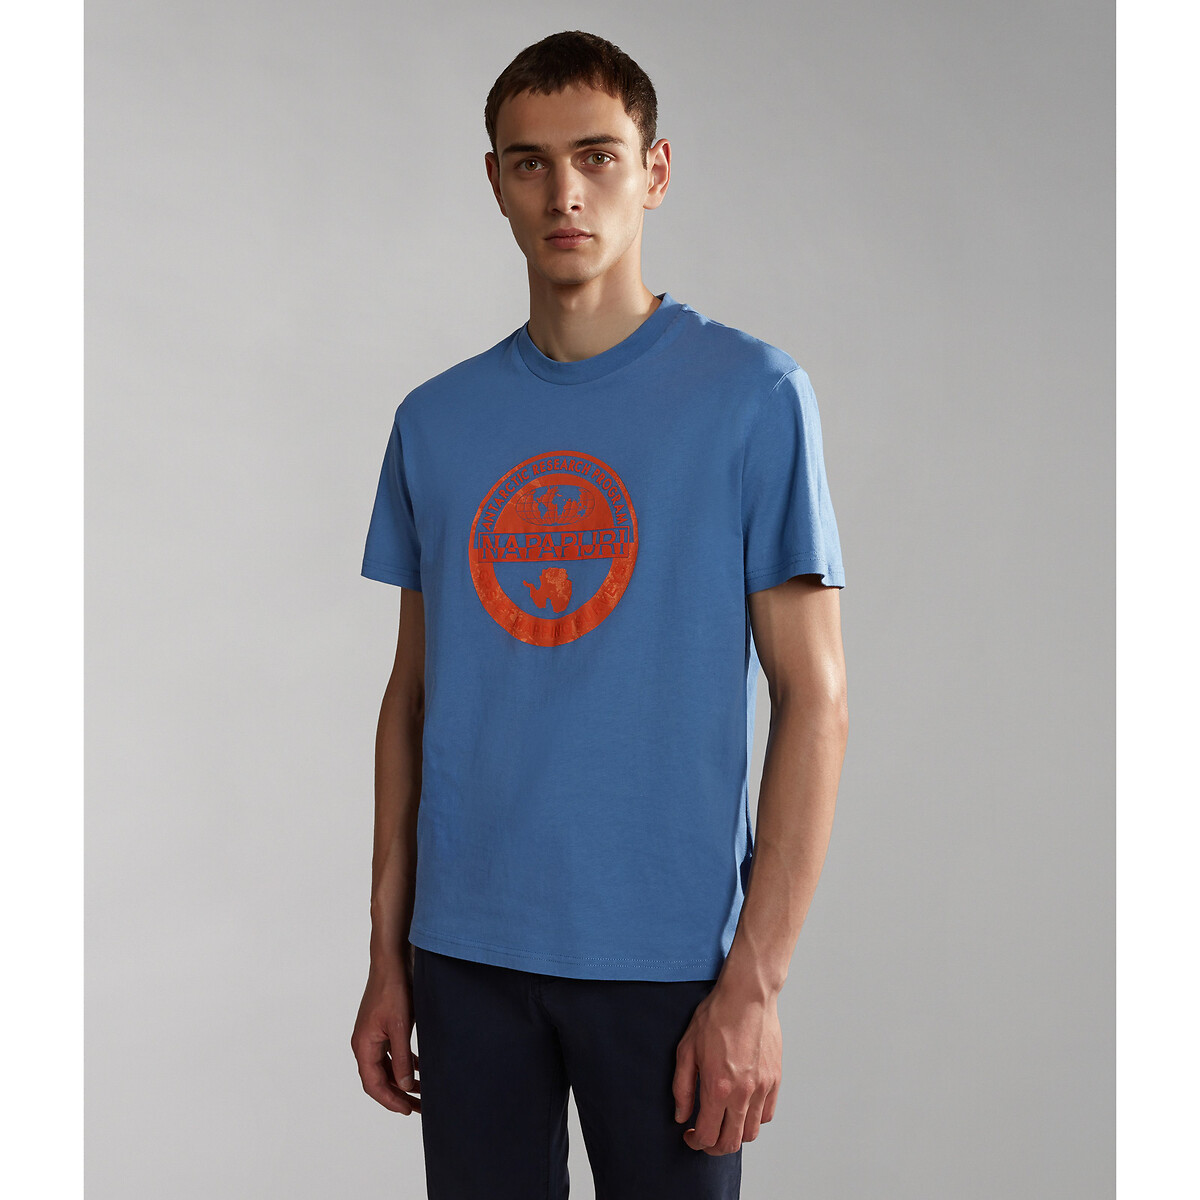 Image of Bollo Logo Print T-Shirt in Cotton with Short Sleeves